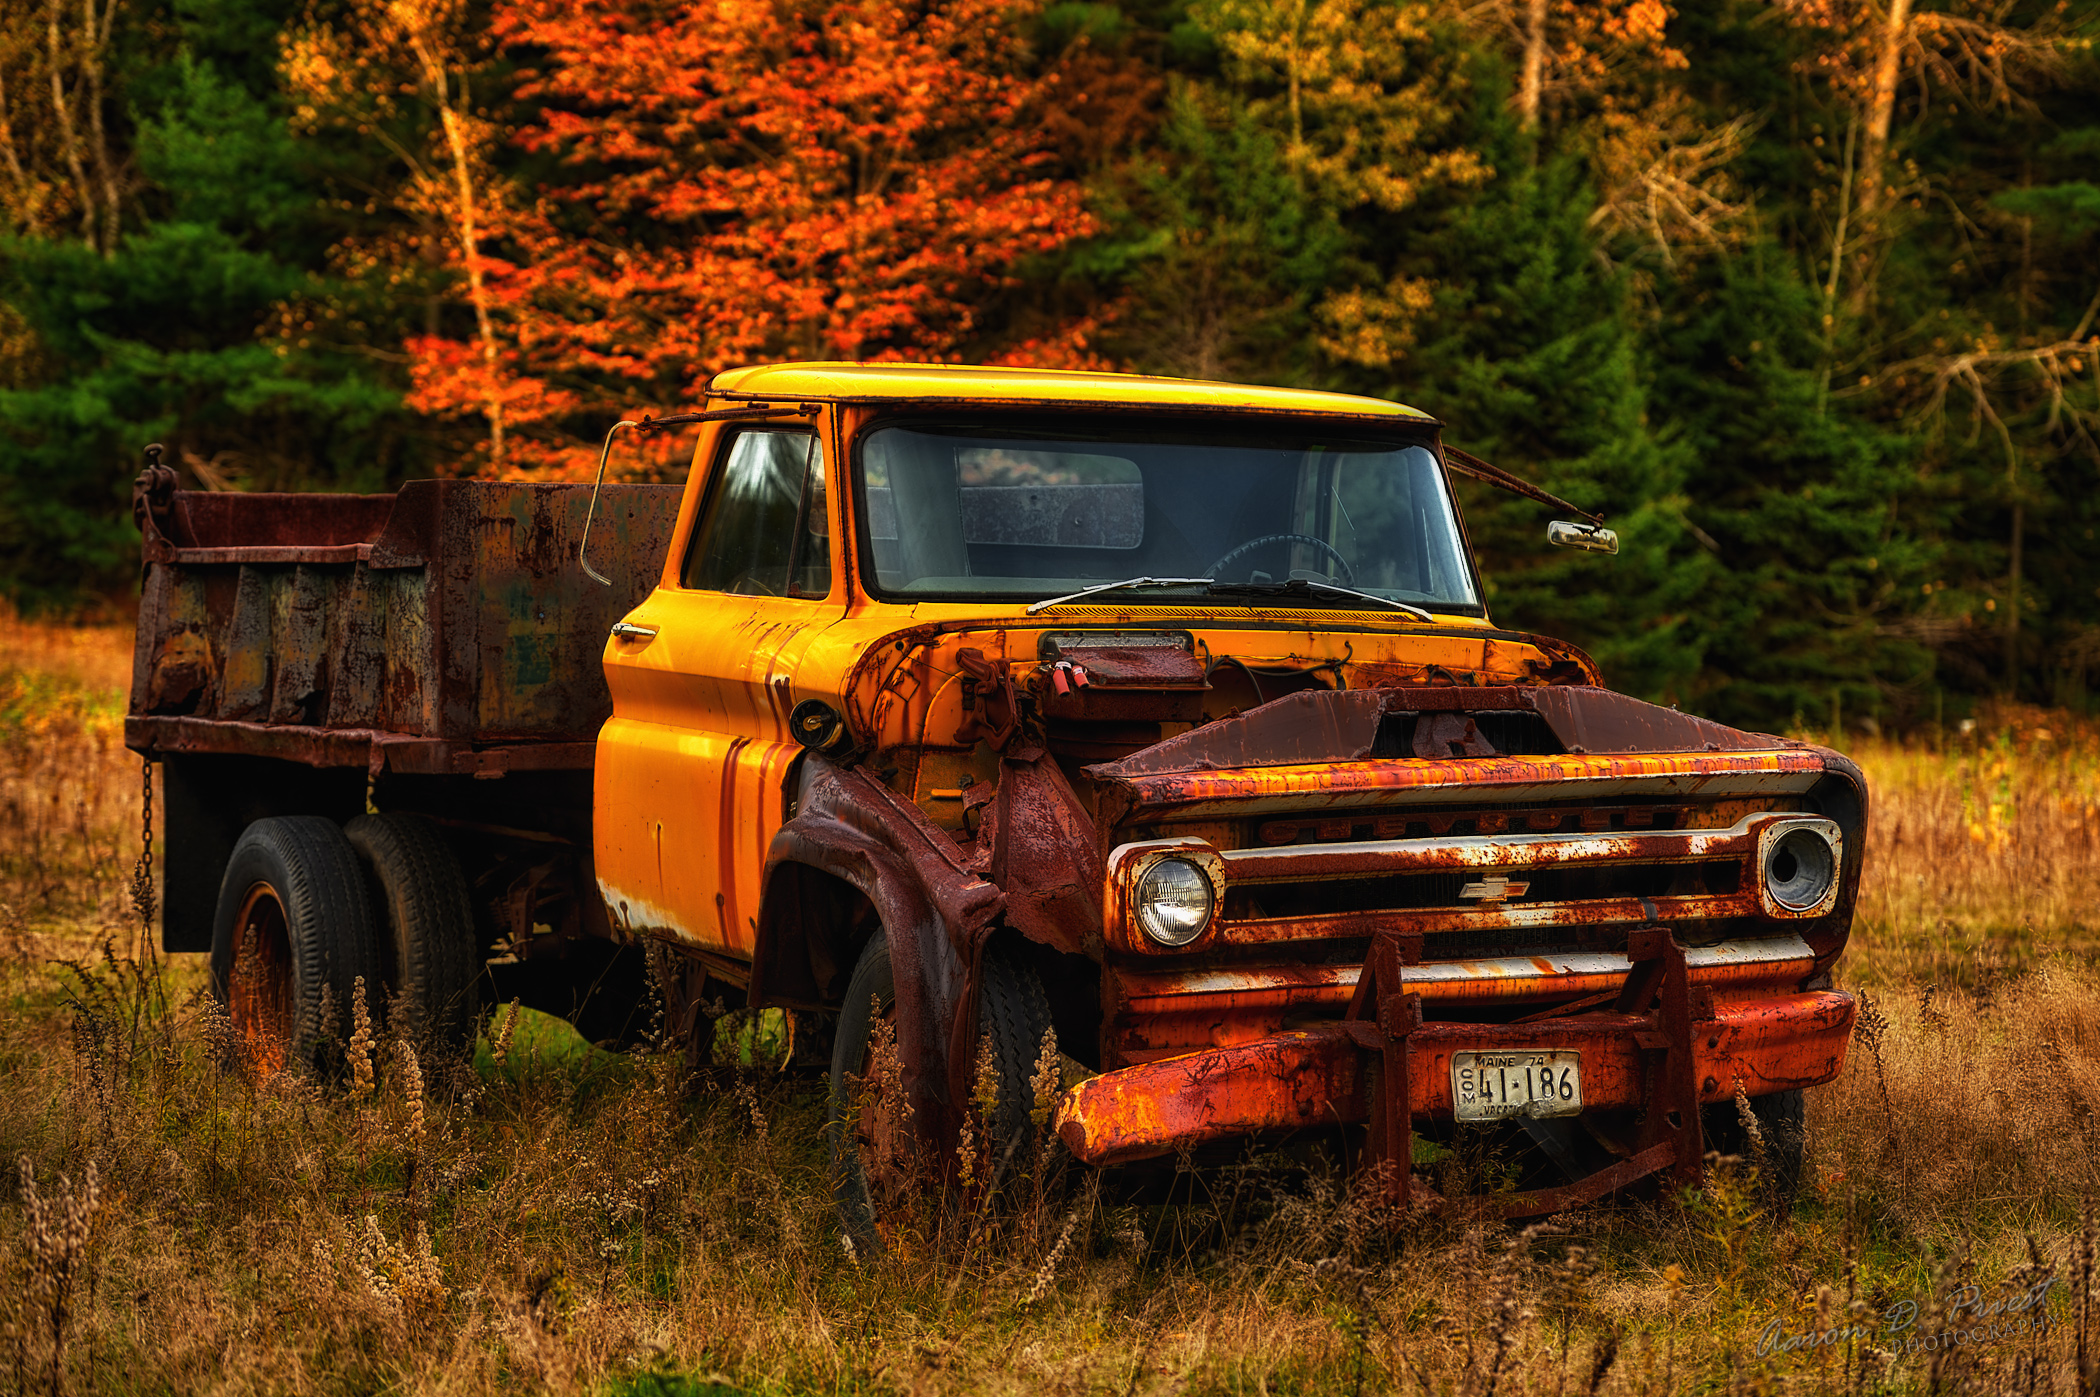 Rusty Dump Truck In Lee, Maine (user submitted)